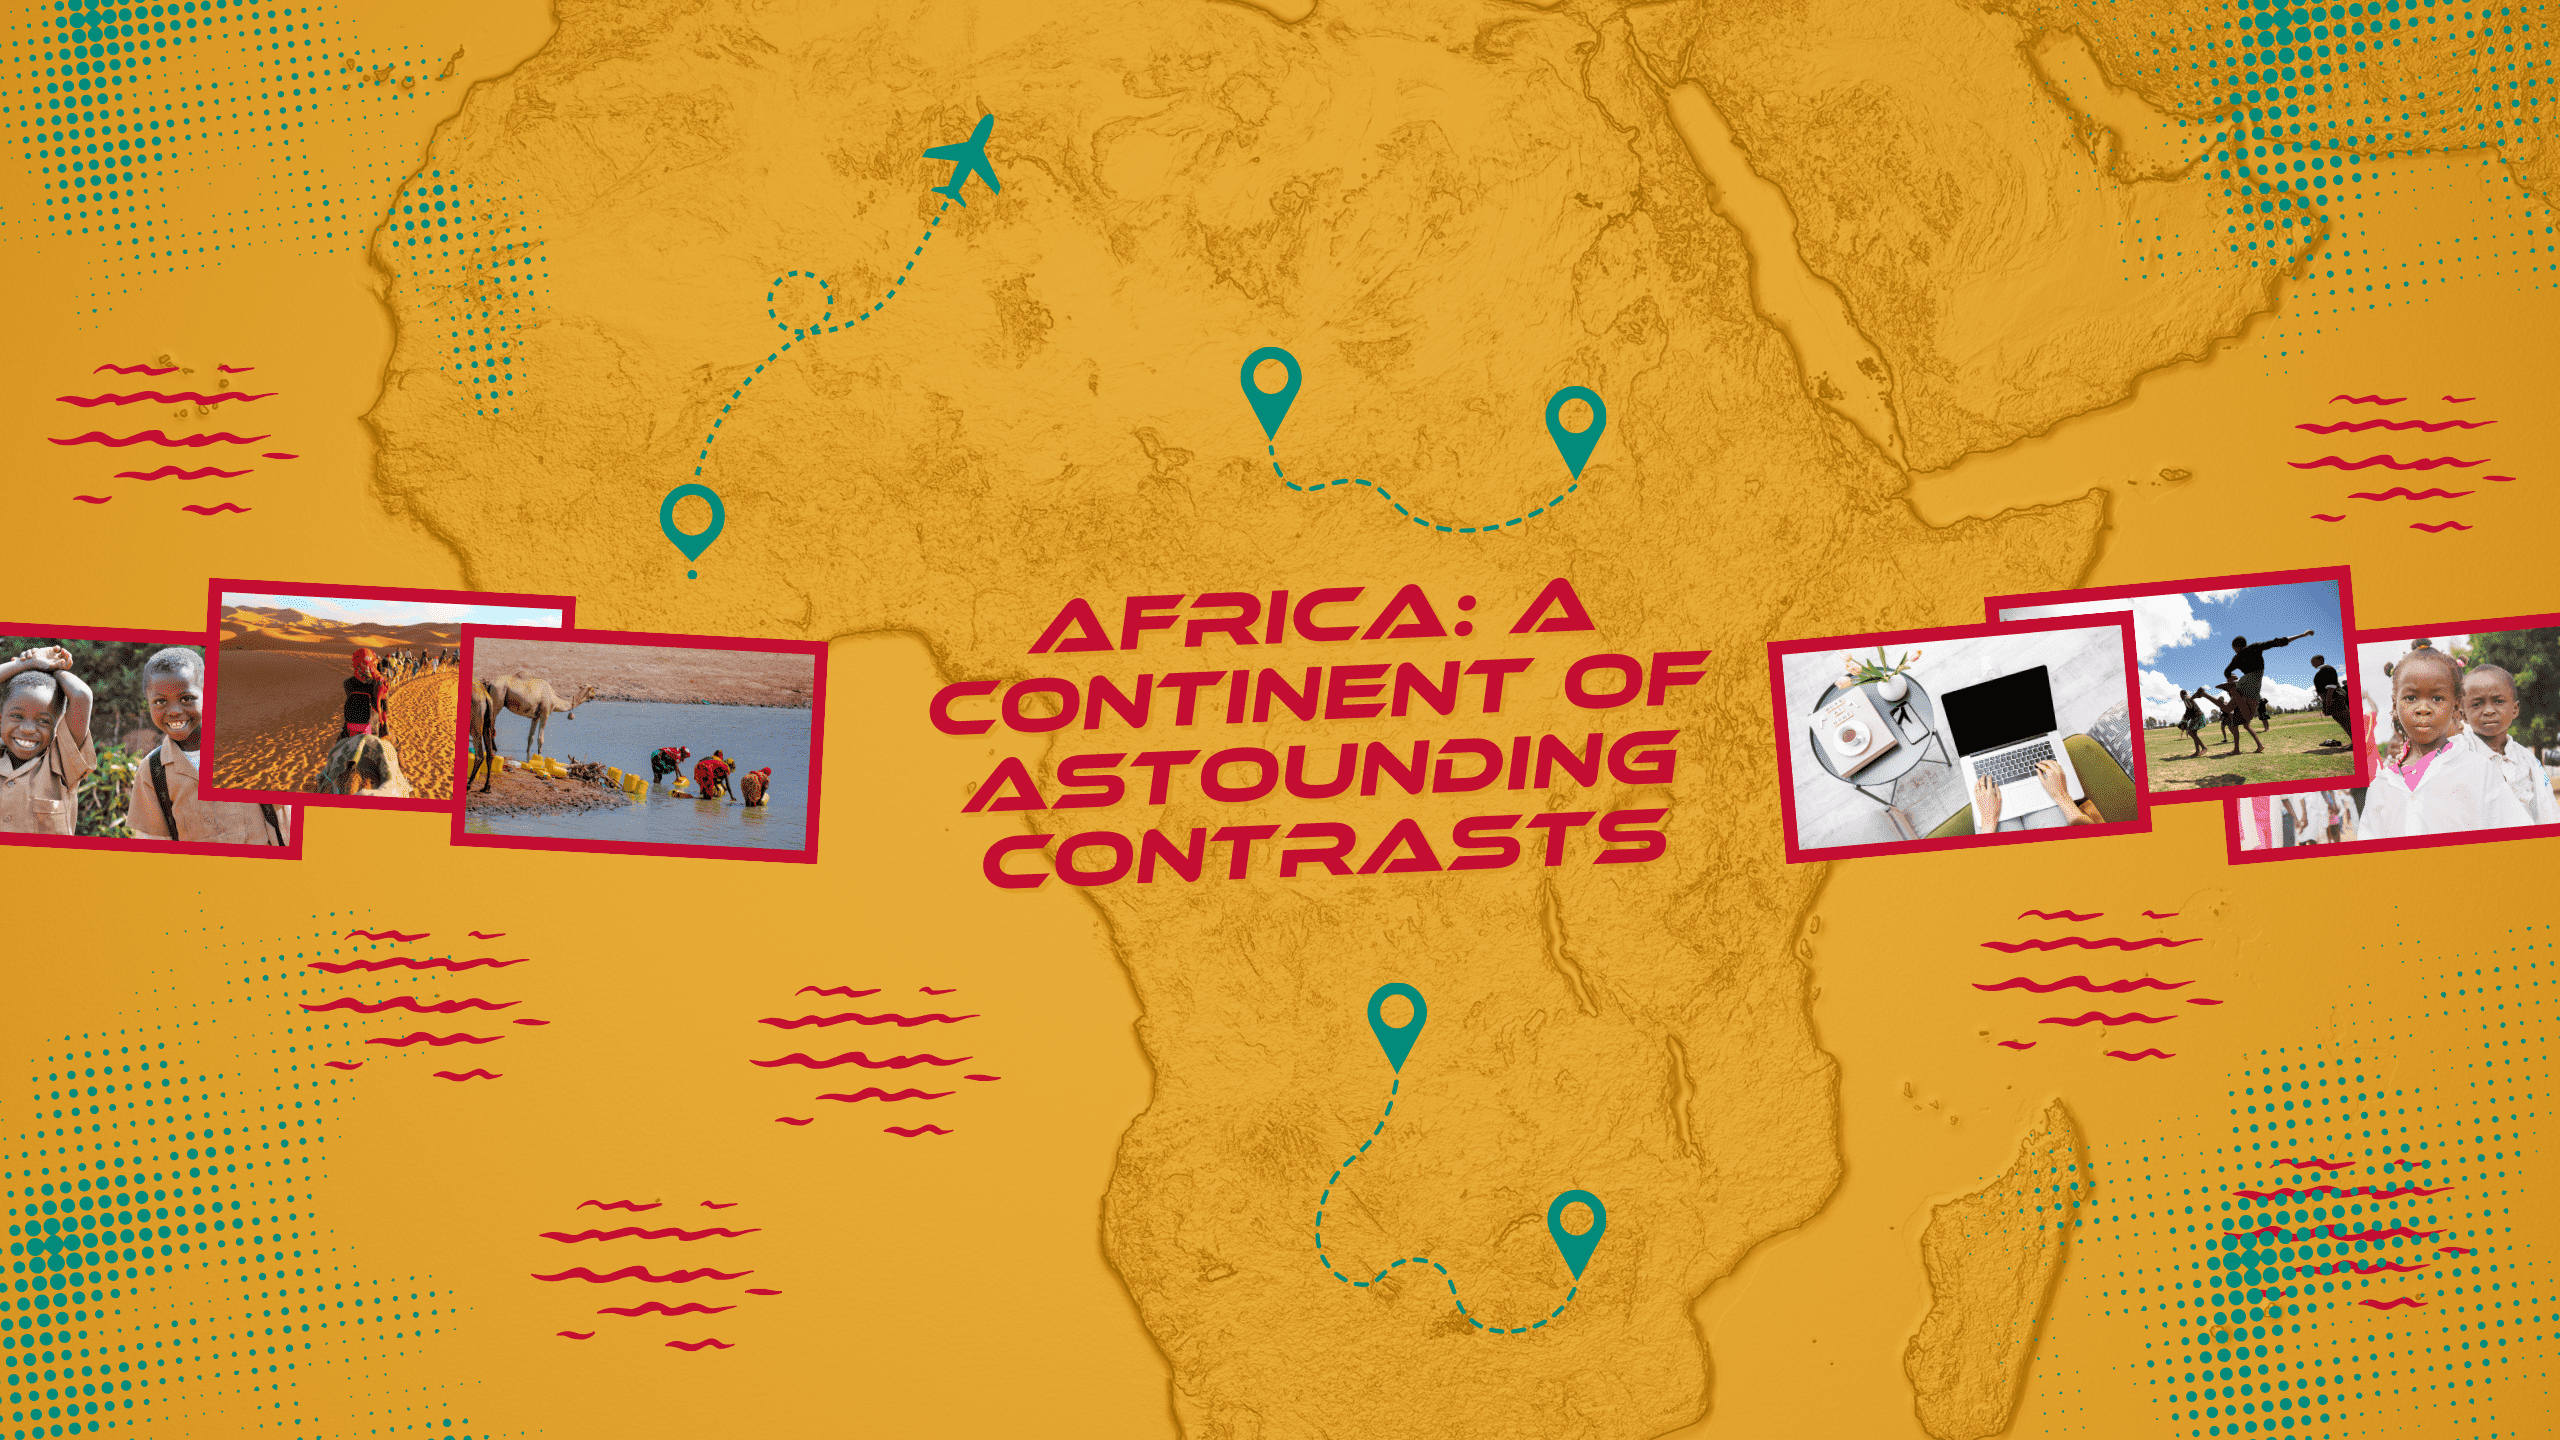 Africa: A Continent of Astounding Contrasts.